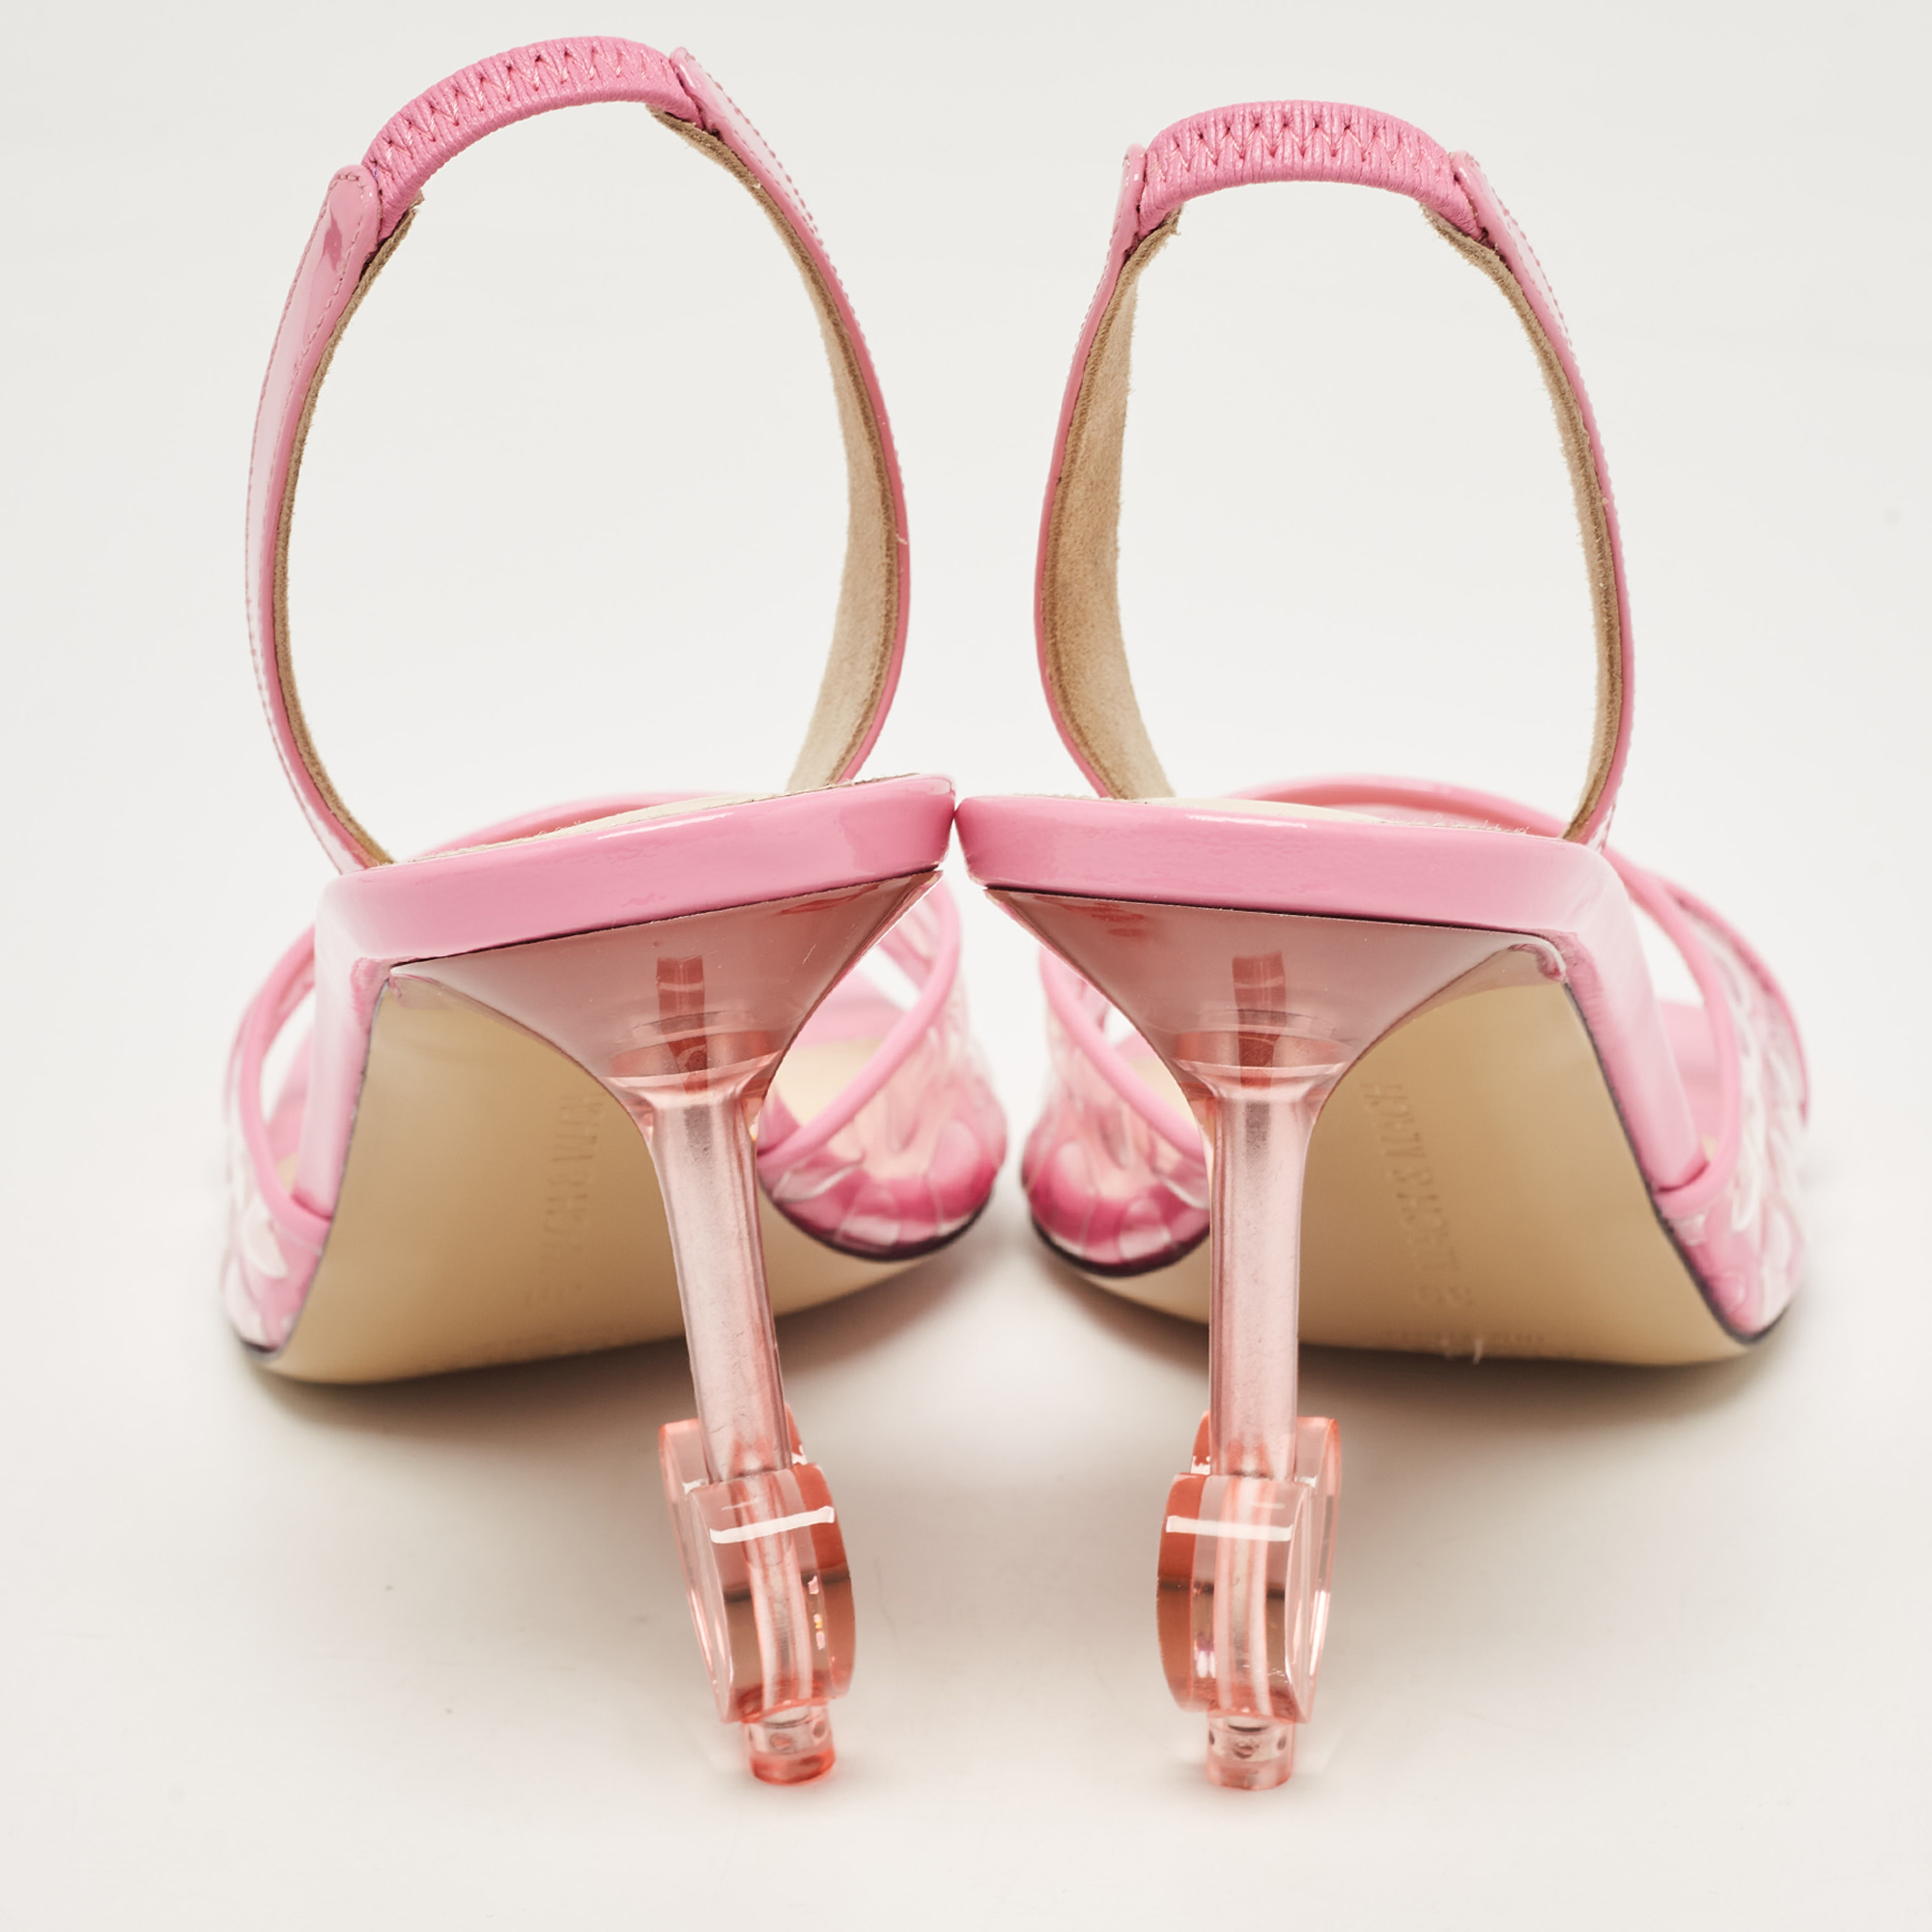 Mach & Mach Pink PVC And Patent Hearts Print Slingback Sandals Size 39